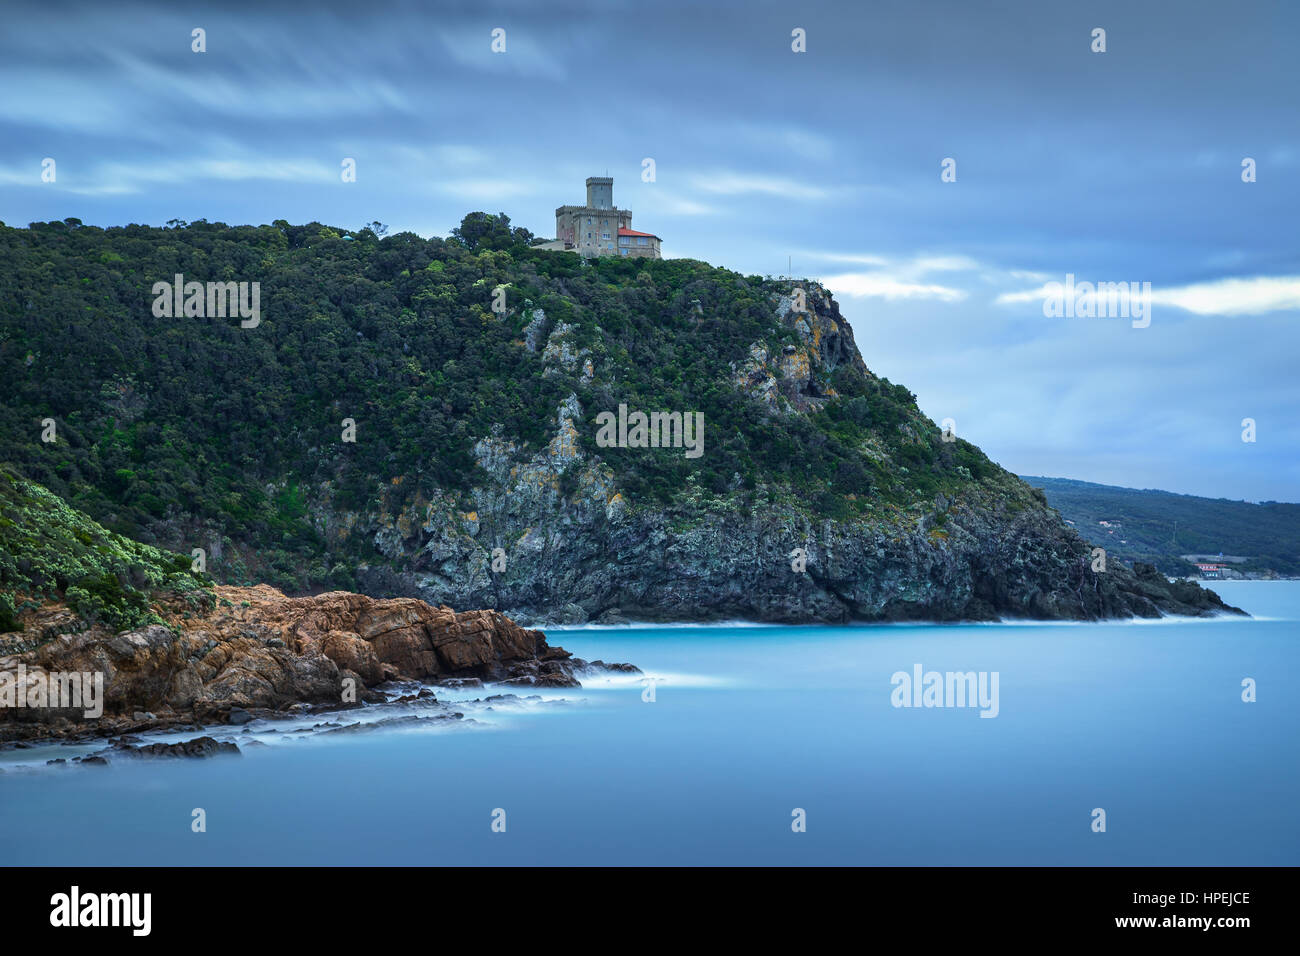 Cliff rock and building on the sea on winter. Quercianella, Tuscany riviera, Italy, Europe. Long Exposure Stock Photo